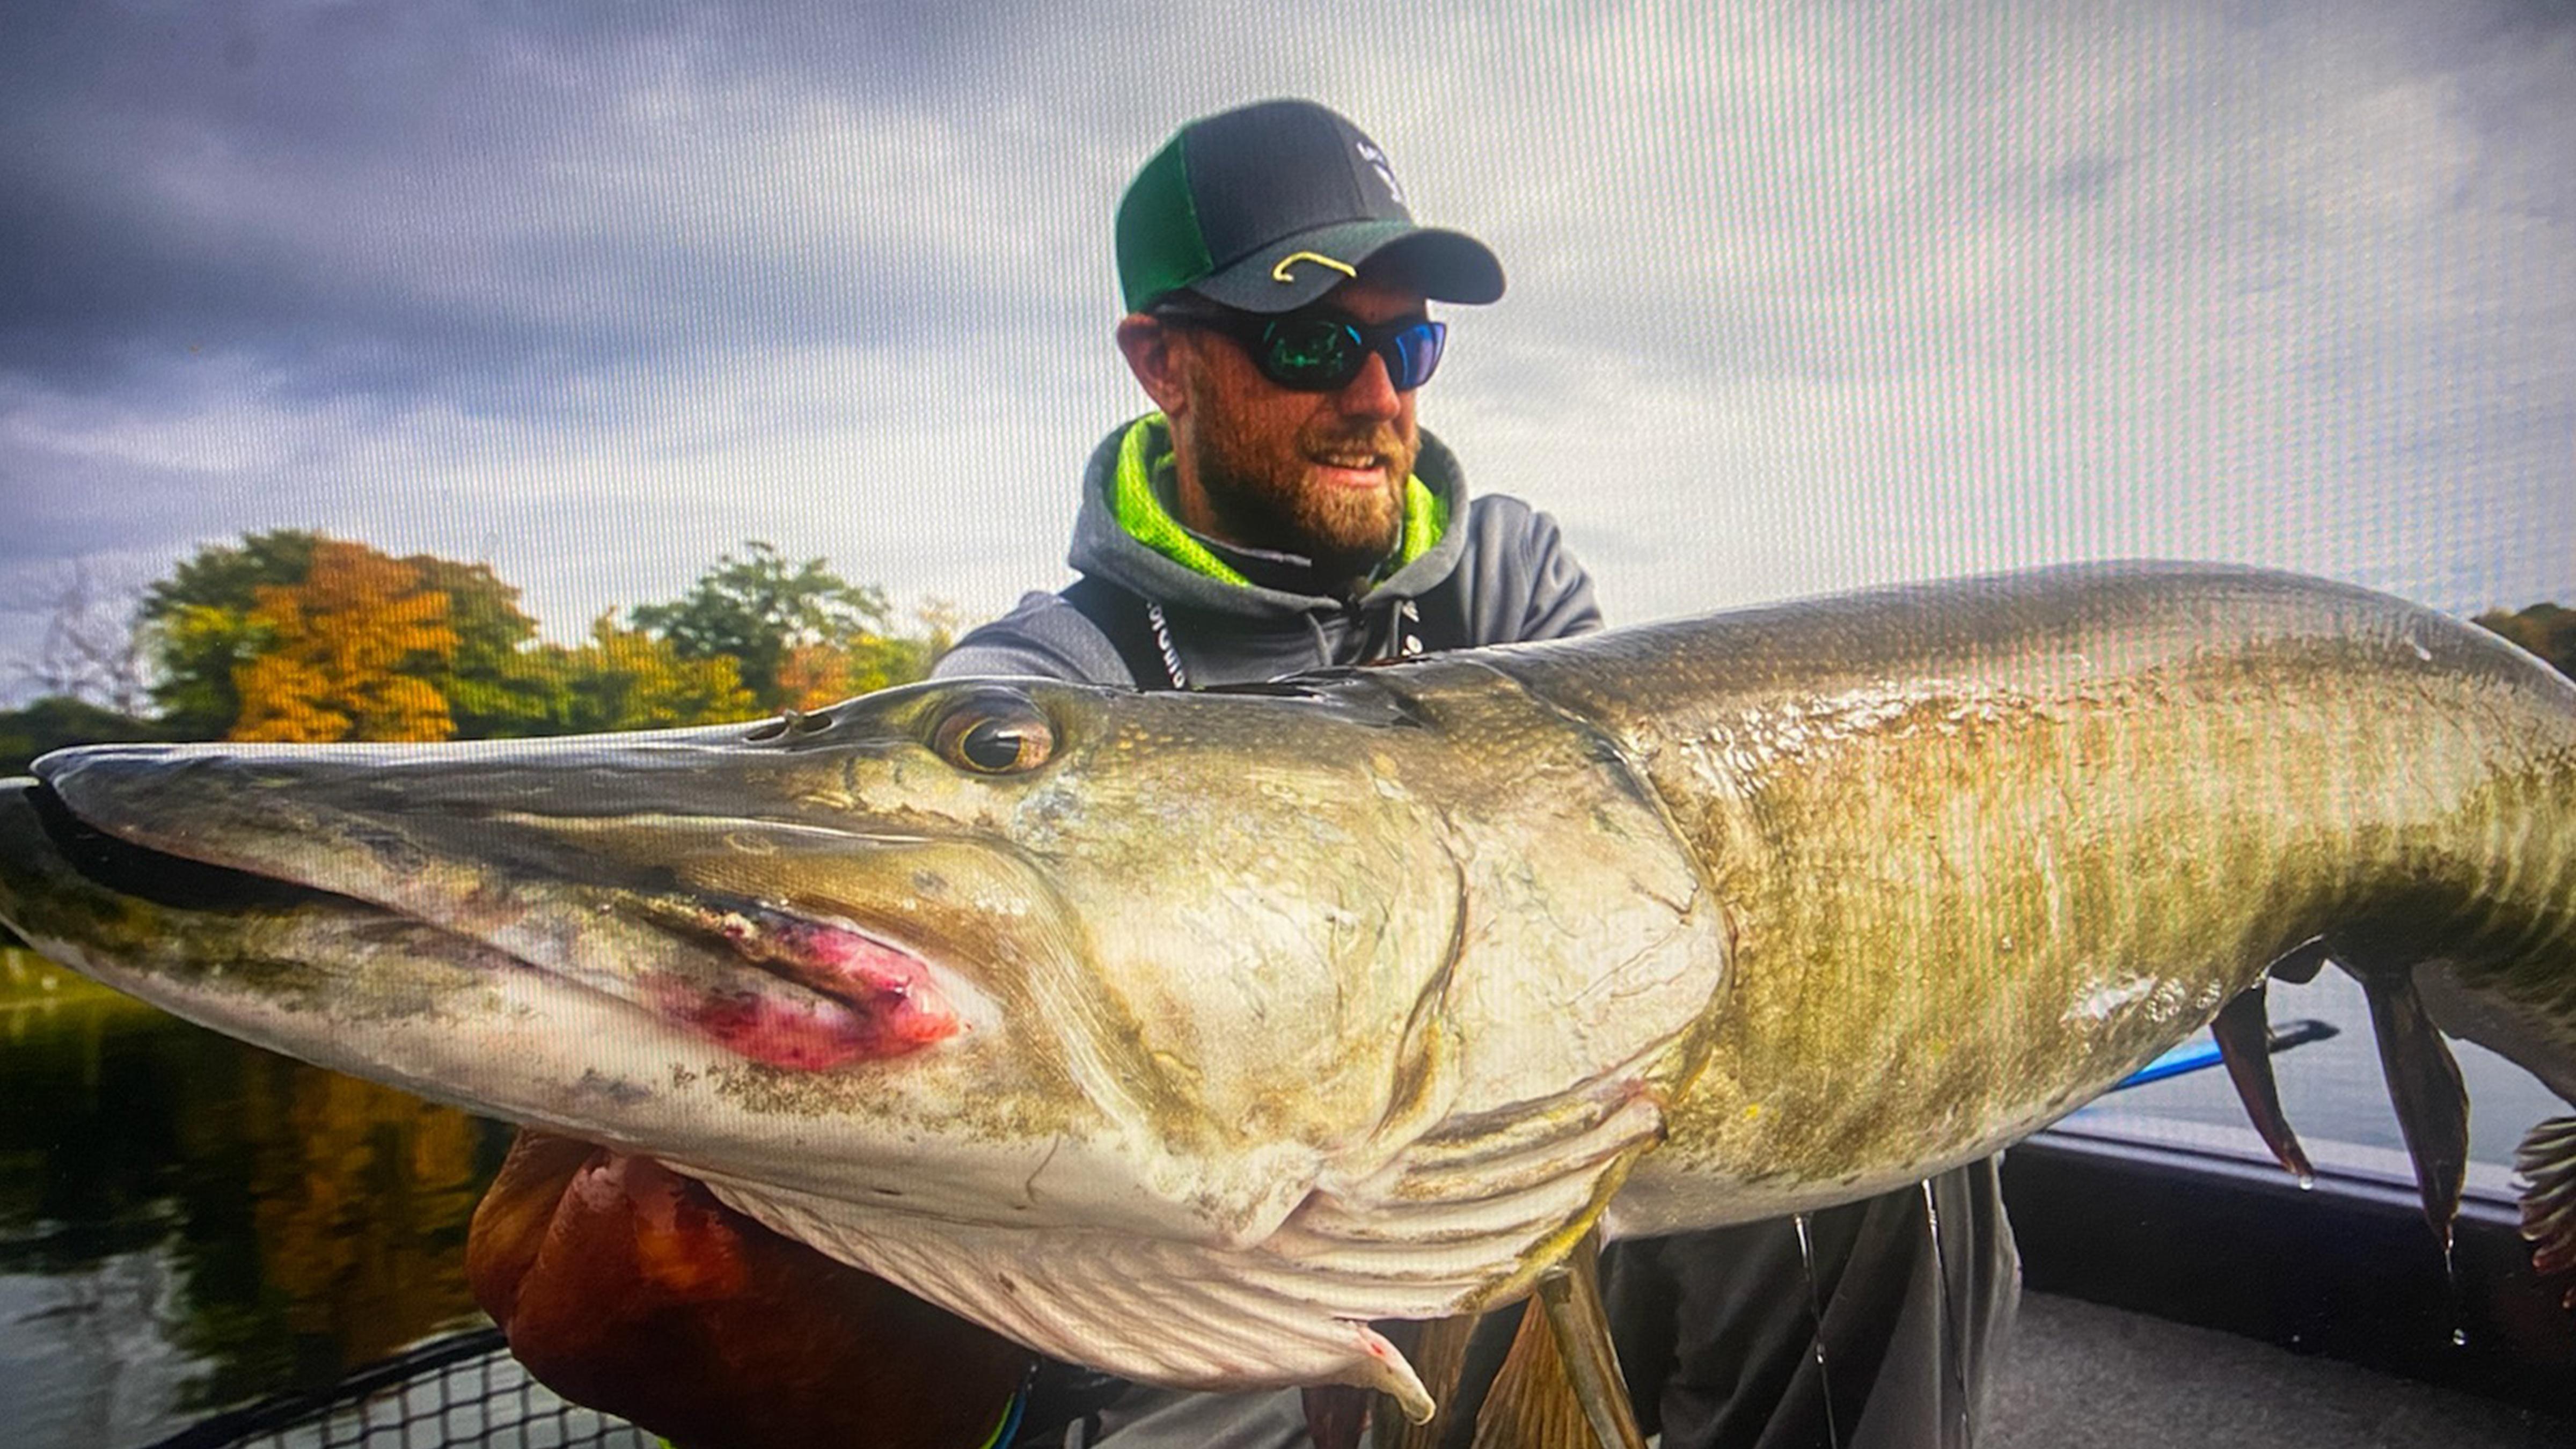 Muskies and Living High” coming up on Prairie Sportsman